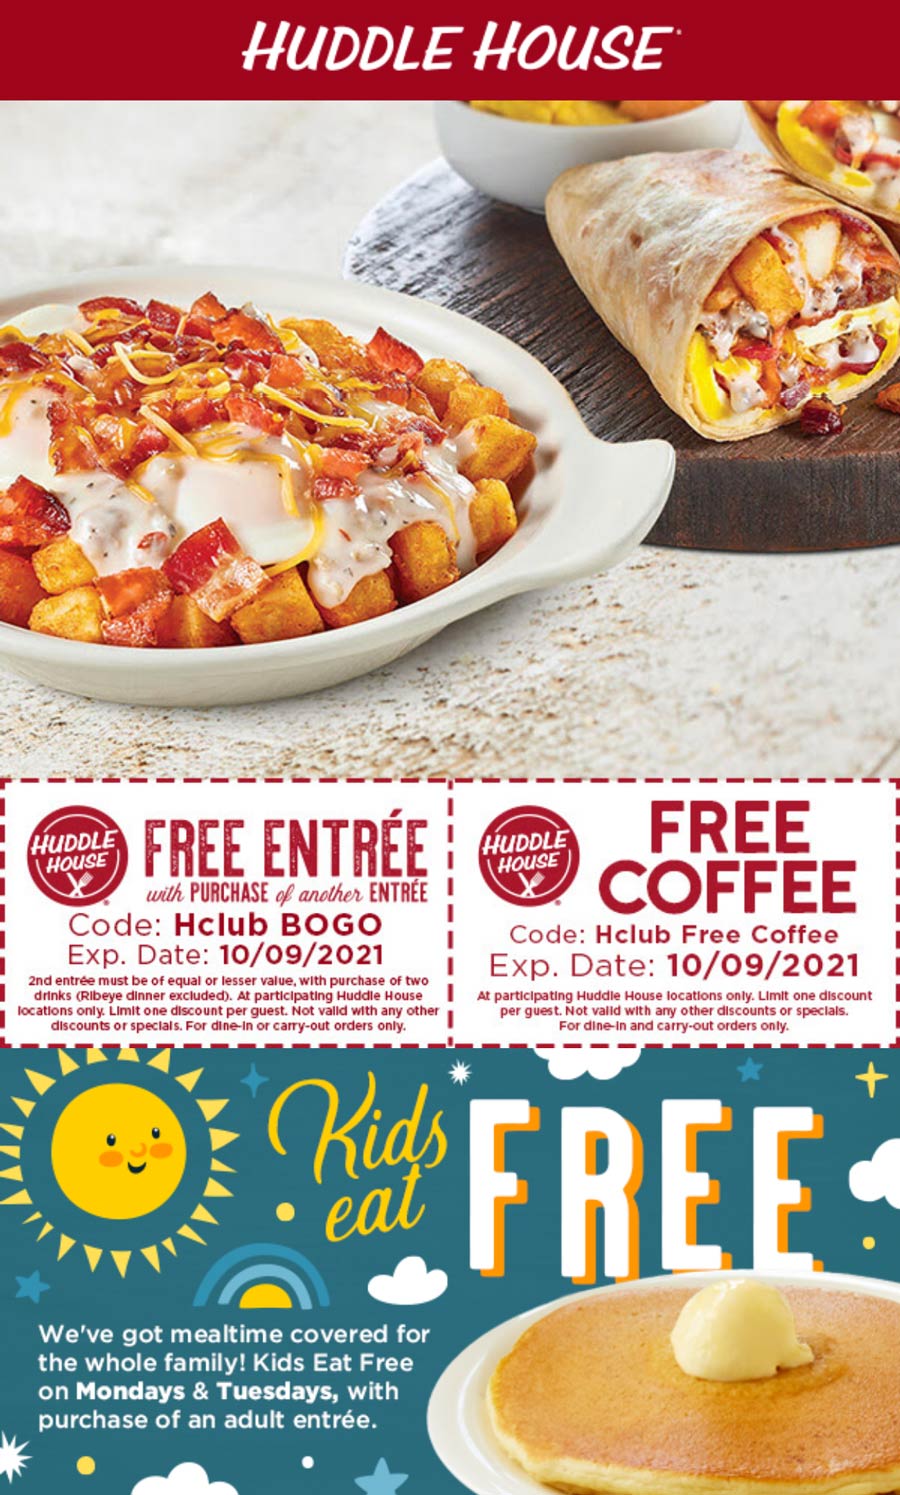 Huddle House restaurants Coupon  Second entree free & free coffee at Huddle House #huddlehouse 